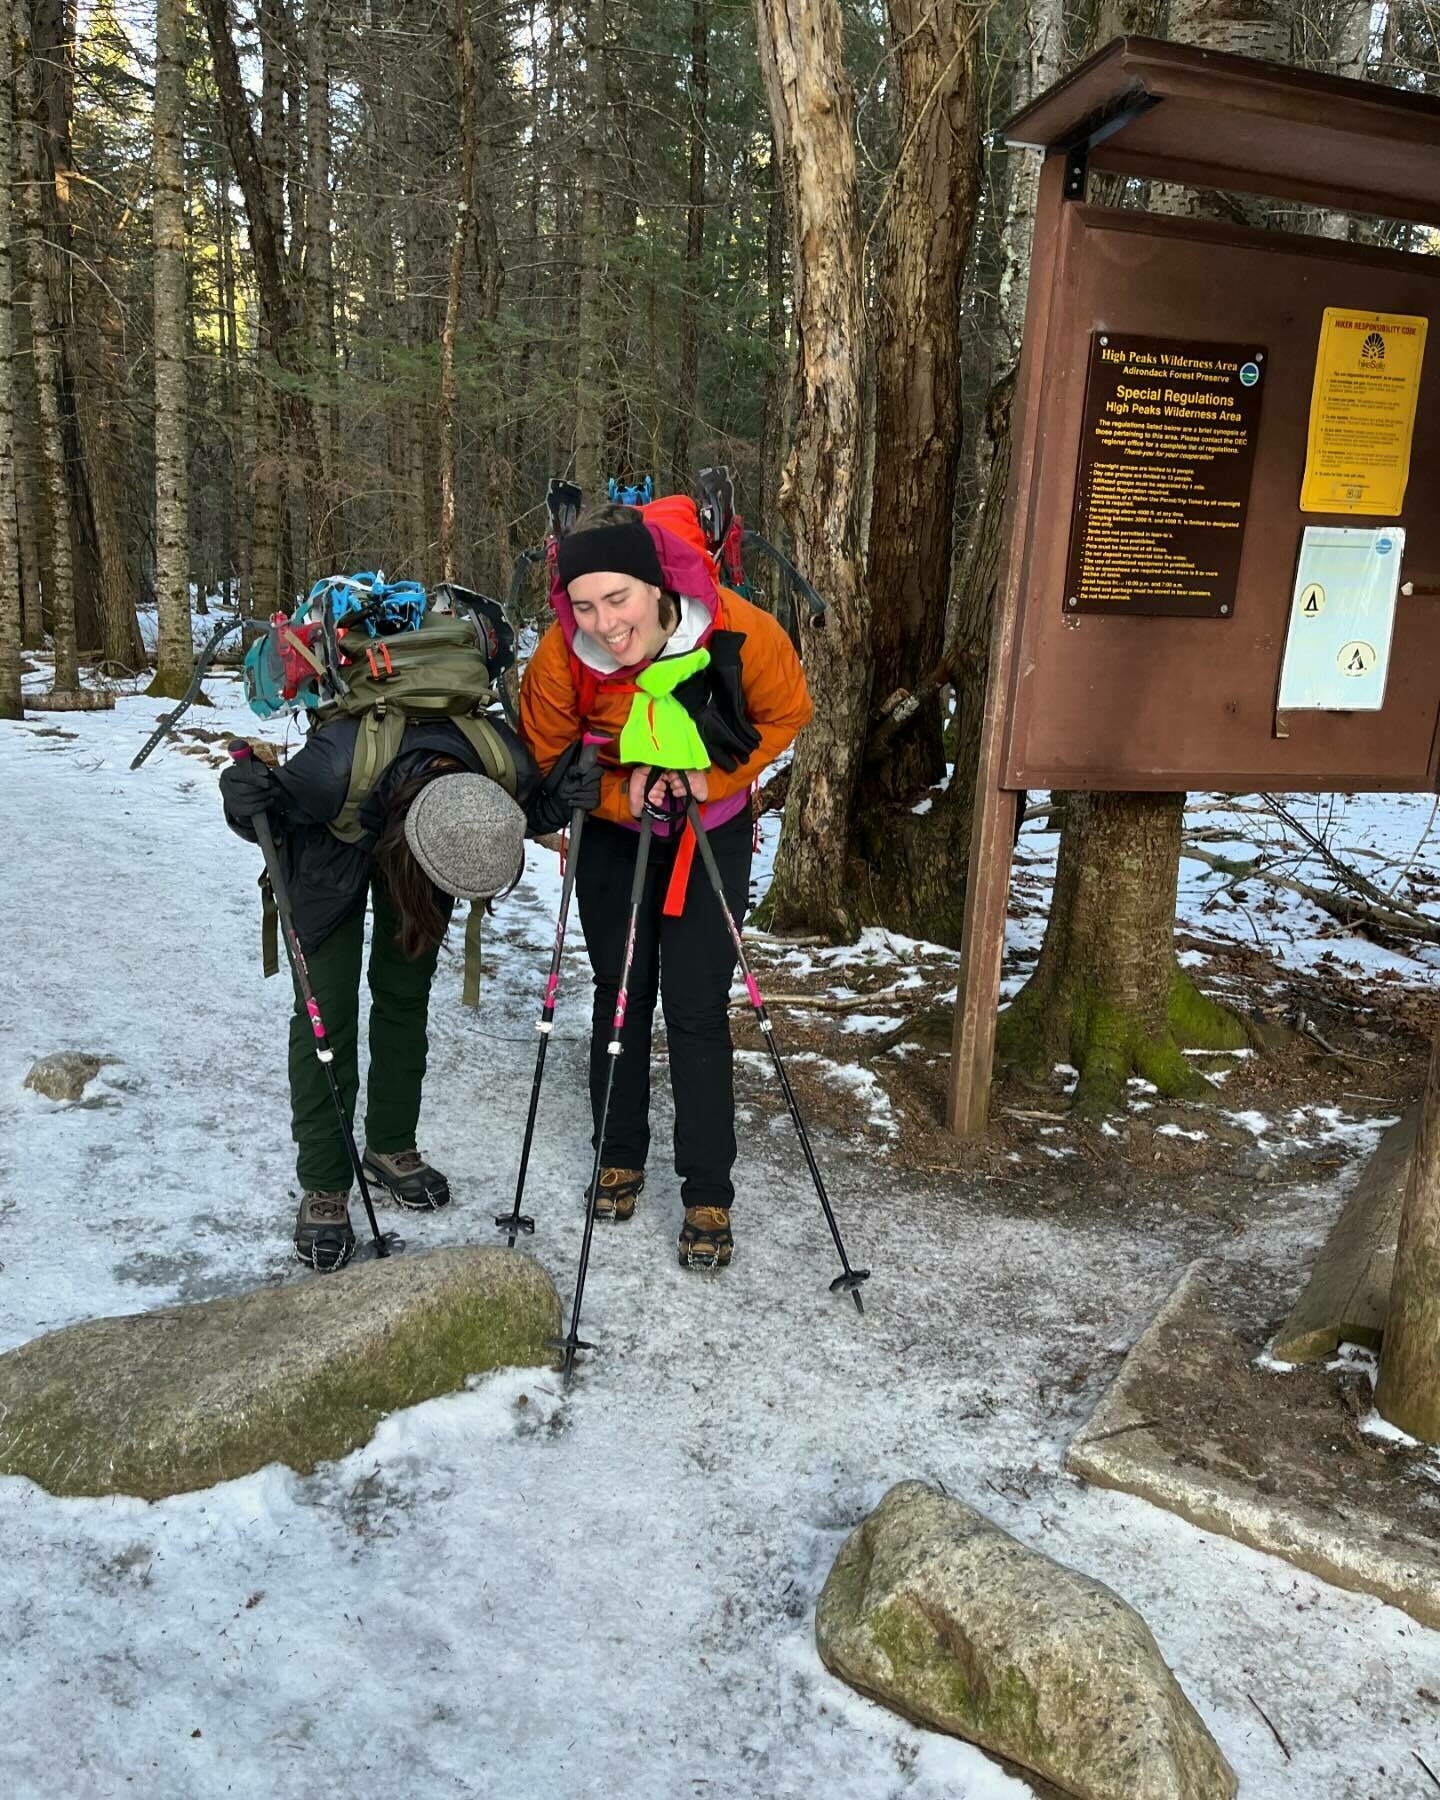 Two hikers with large backpacks stand on a snowy trail, one smiling mid-motion; behind them is a signpost with text, in a wooded area. Signpost text: &ldquo;High Peaks Wilderness Area Special Regulations apply in the High Peaks Wilderness Area&rdquo;